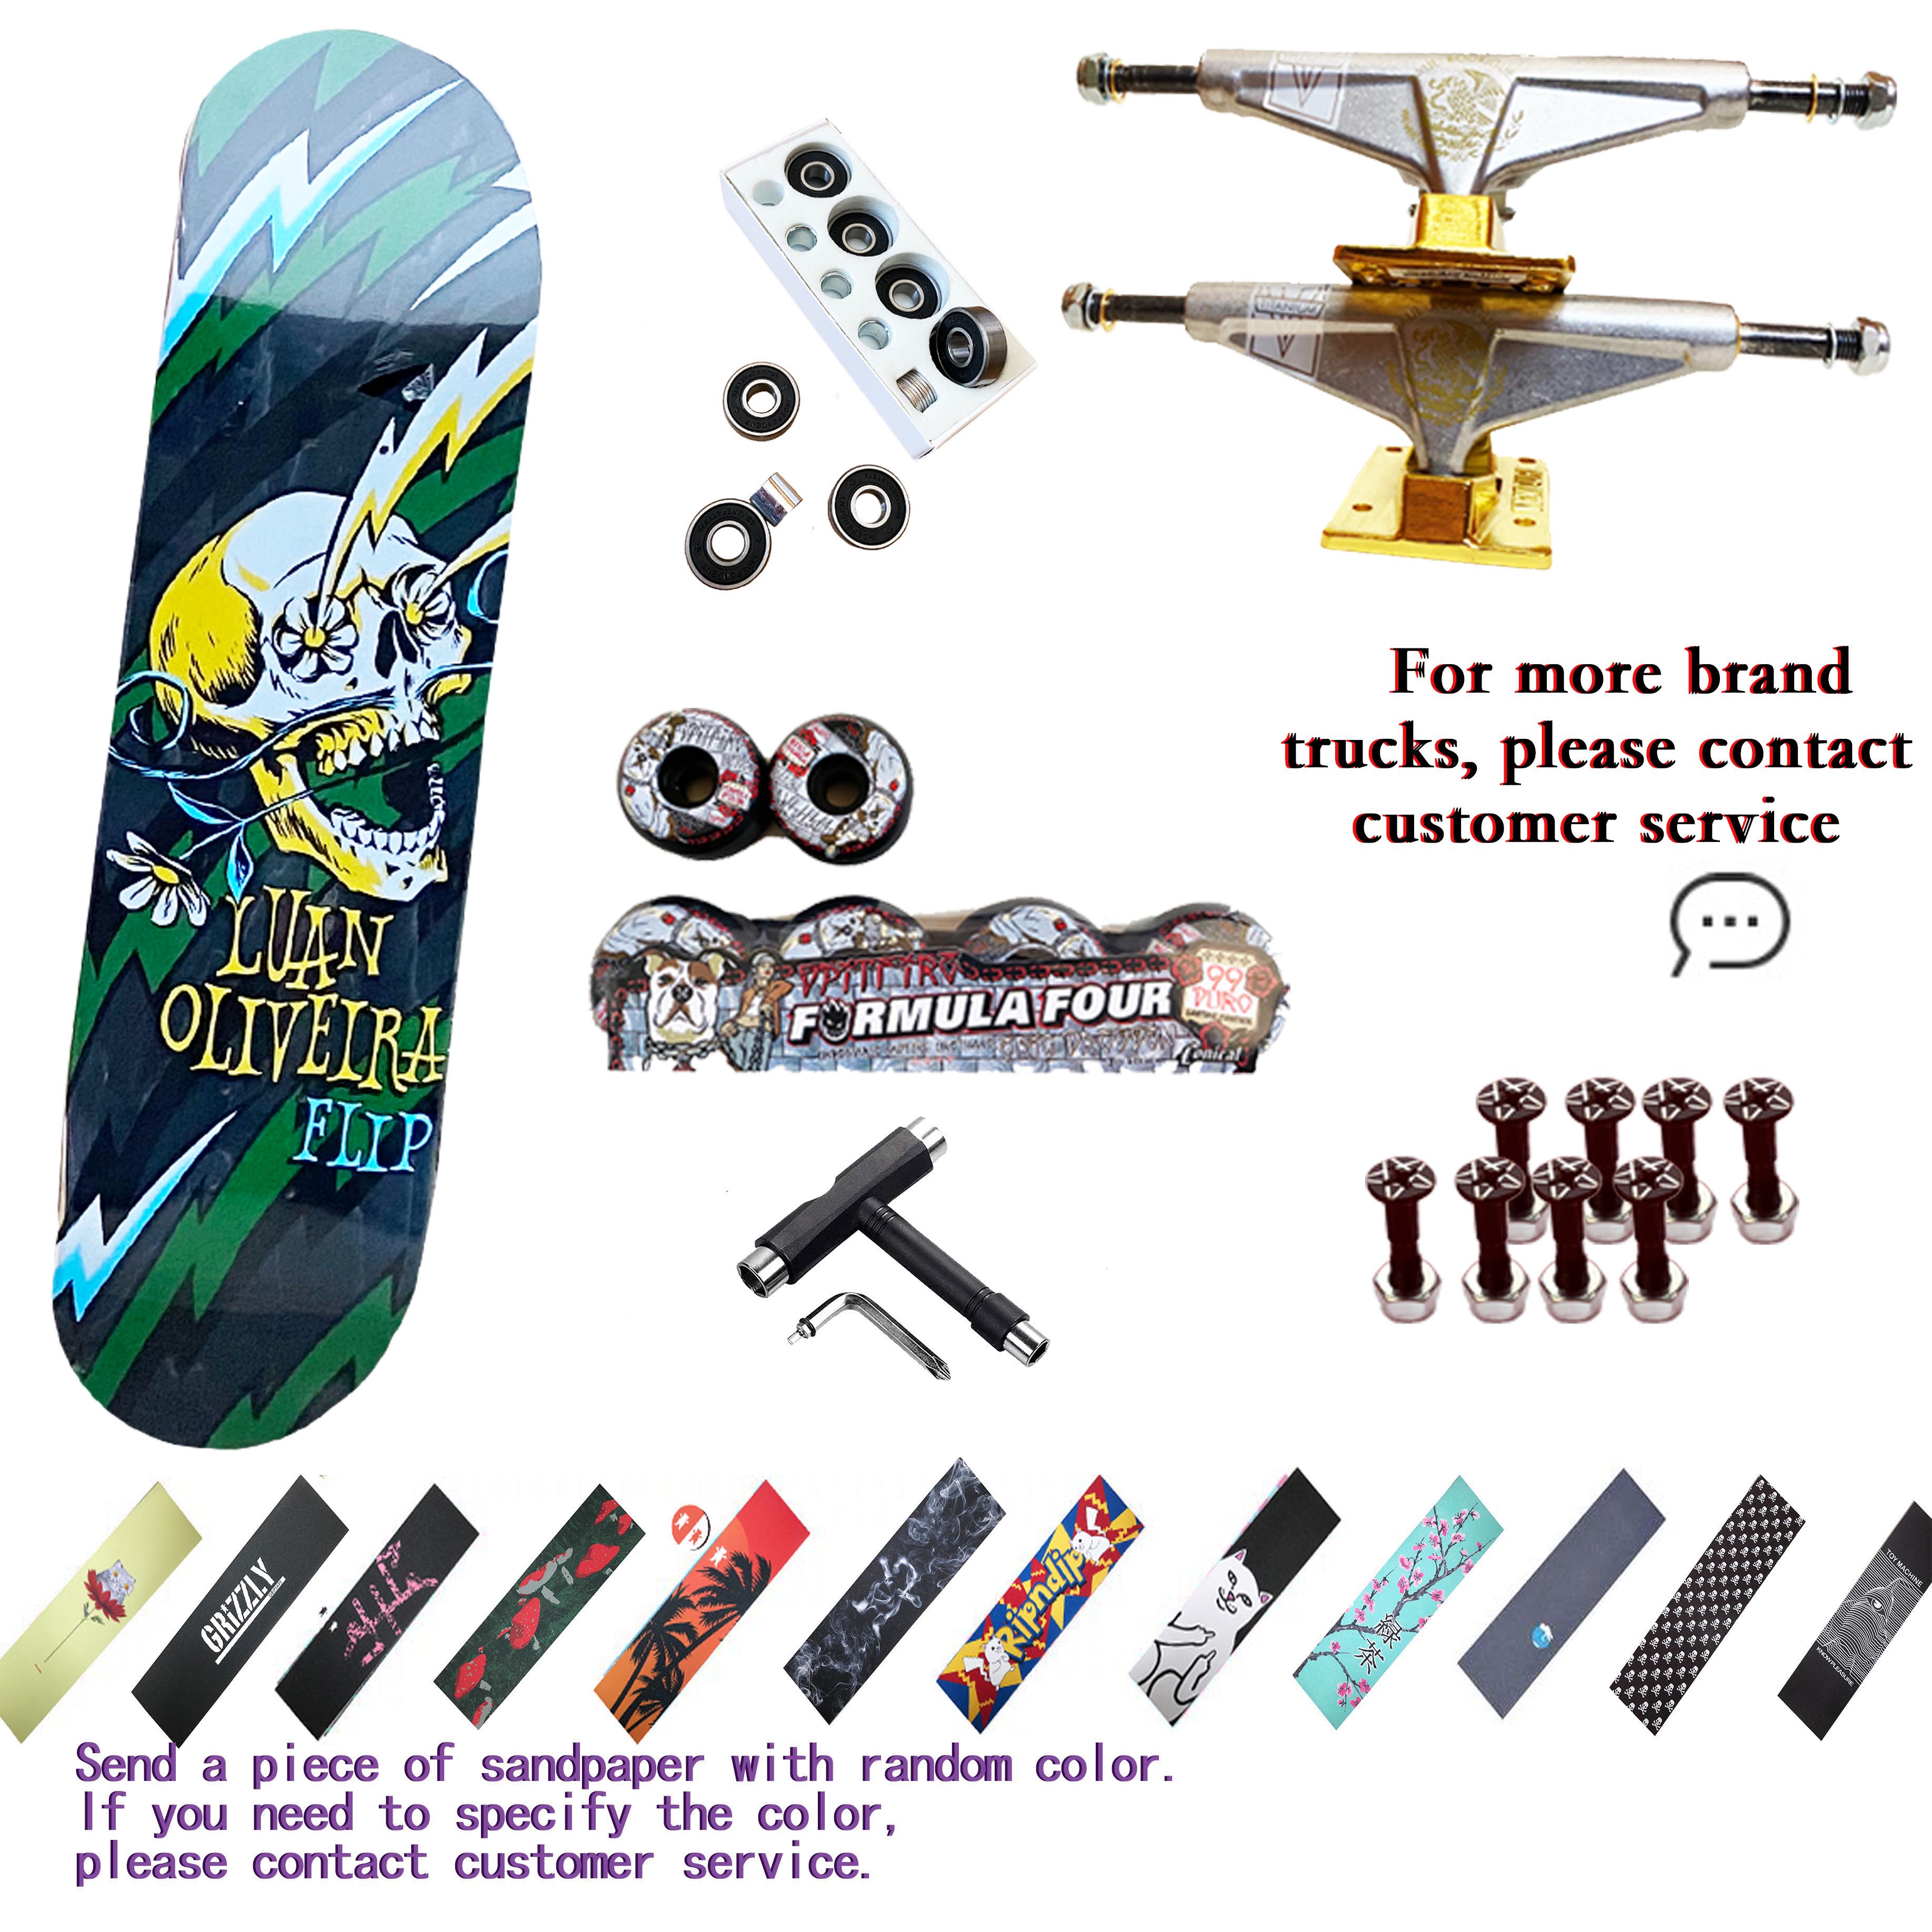 Skateboard professional all accessoriesIncluded7-layer Canadian Double Warped Skateboard High-quality Skateboard 8.0 Inch